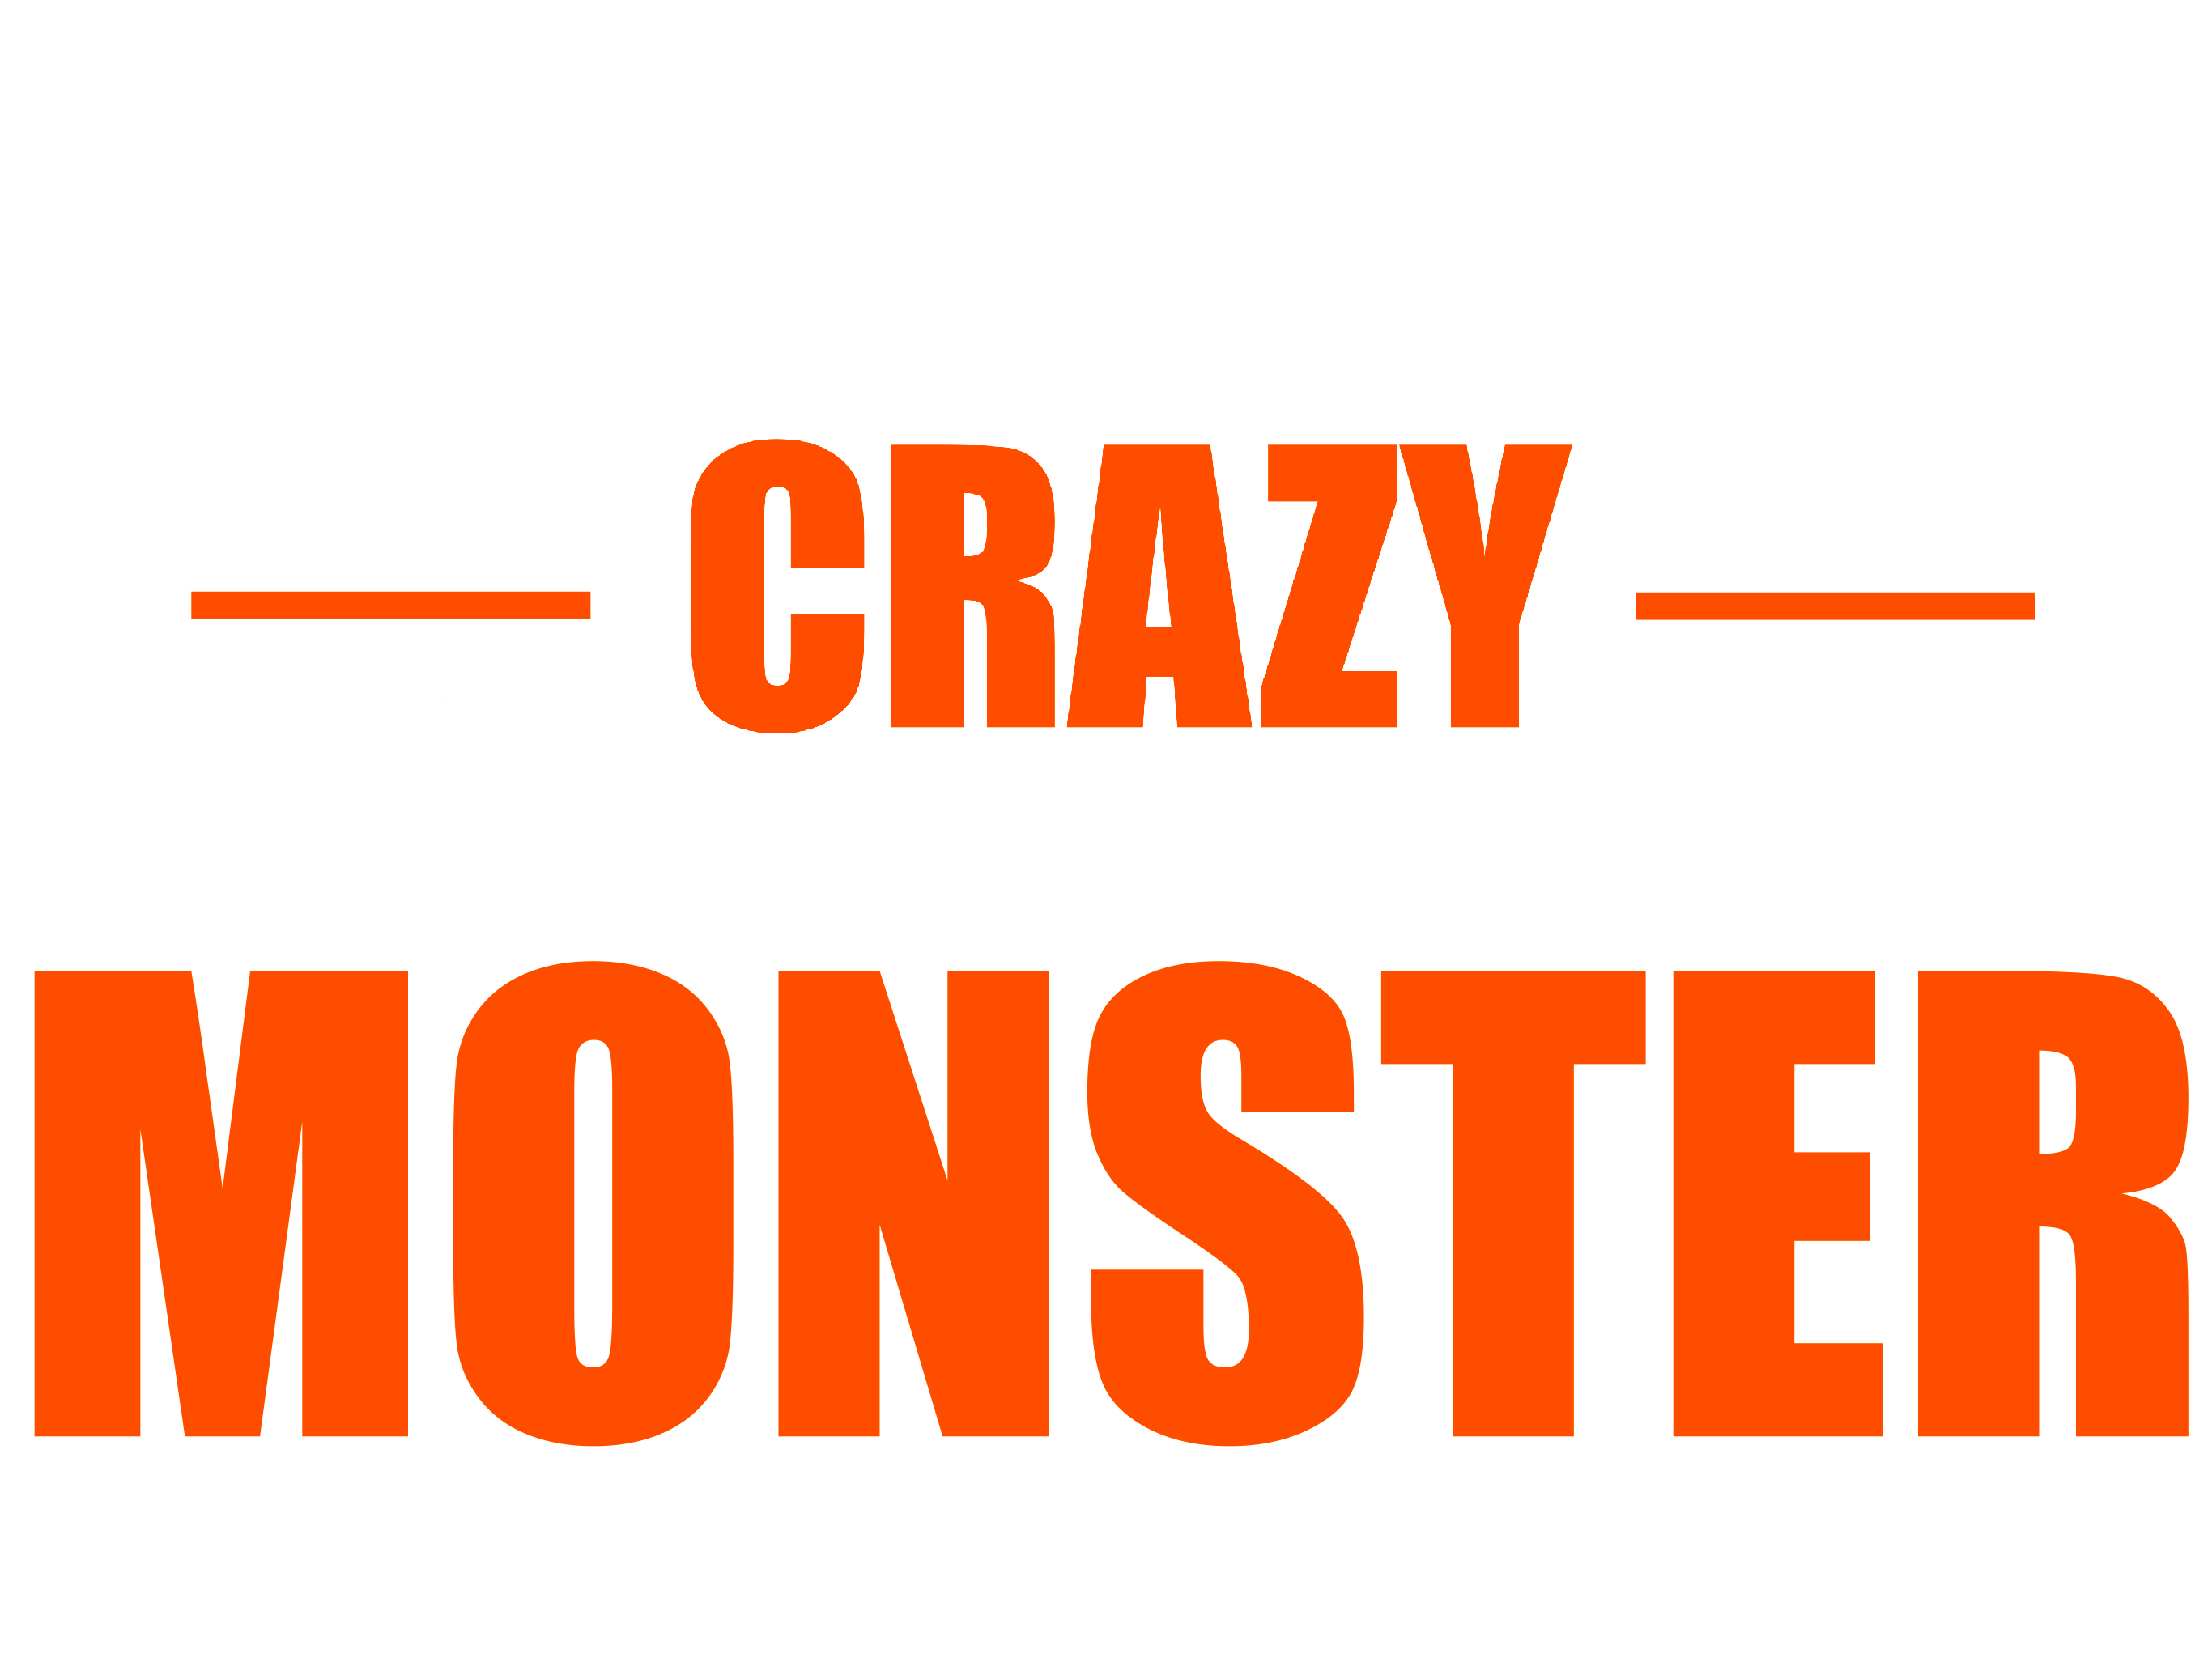 Maybe Crazy Monster